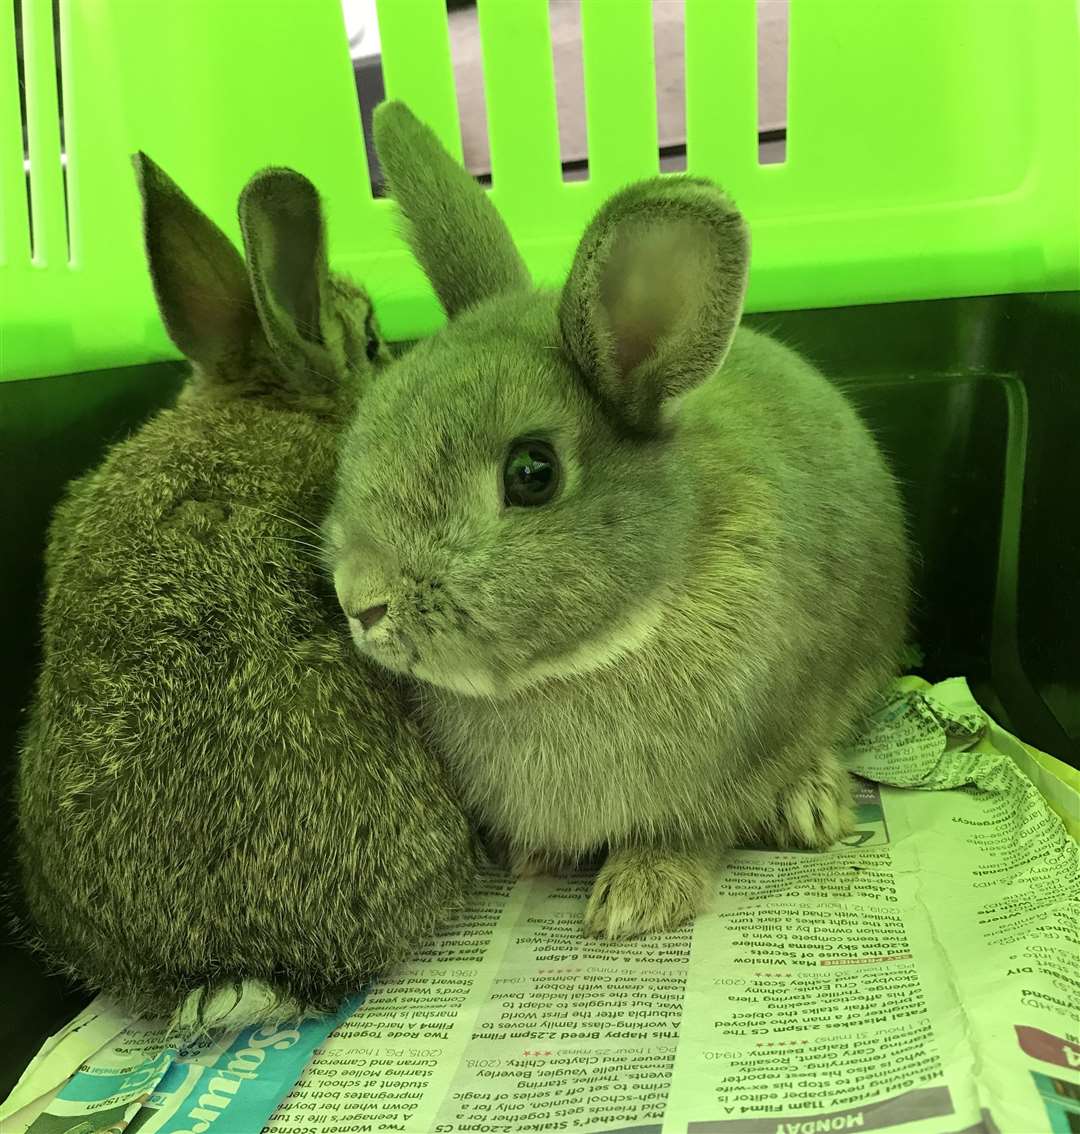 The rabbits were found in pet carriers. Picture: RSPCA